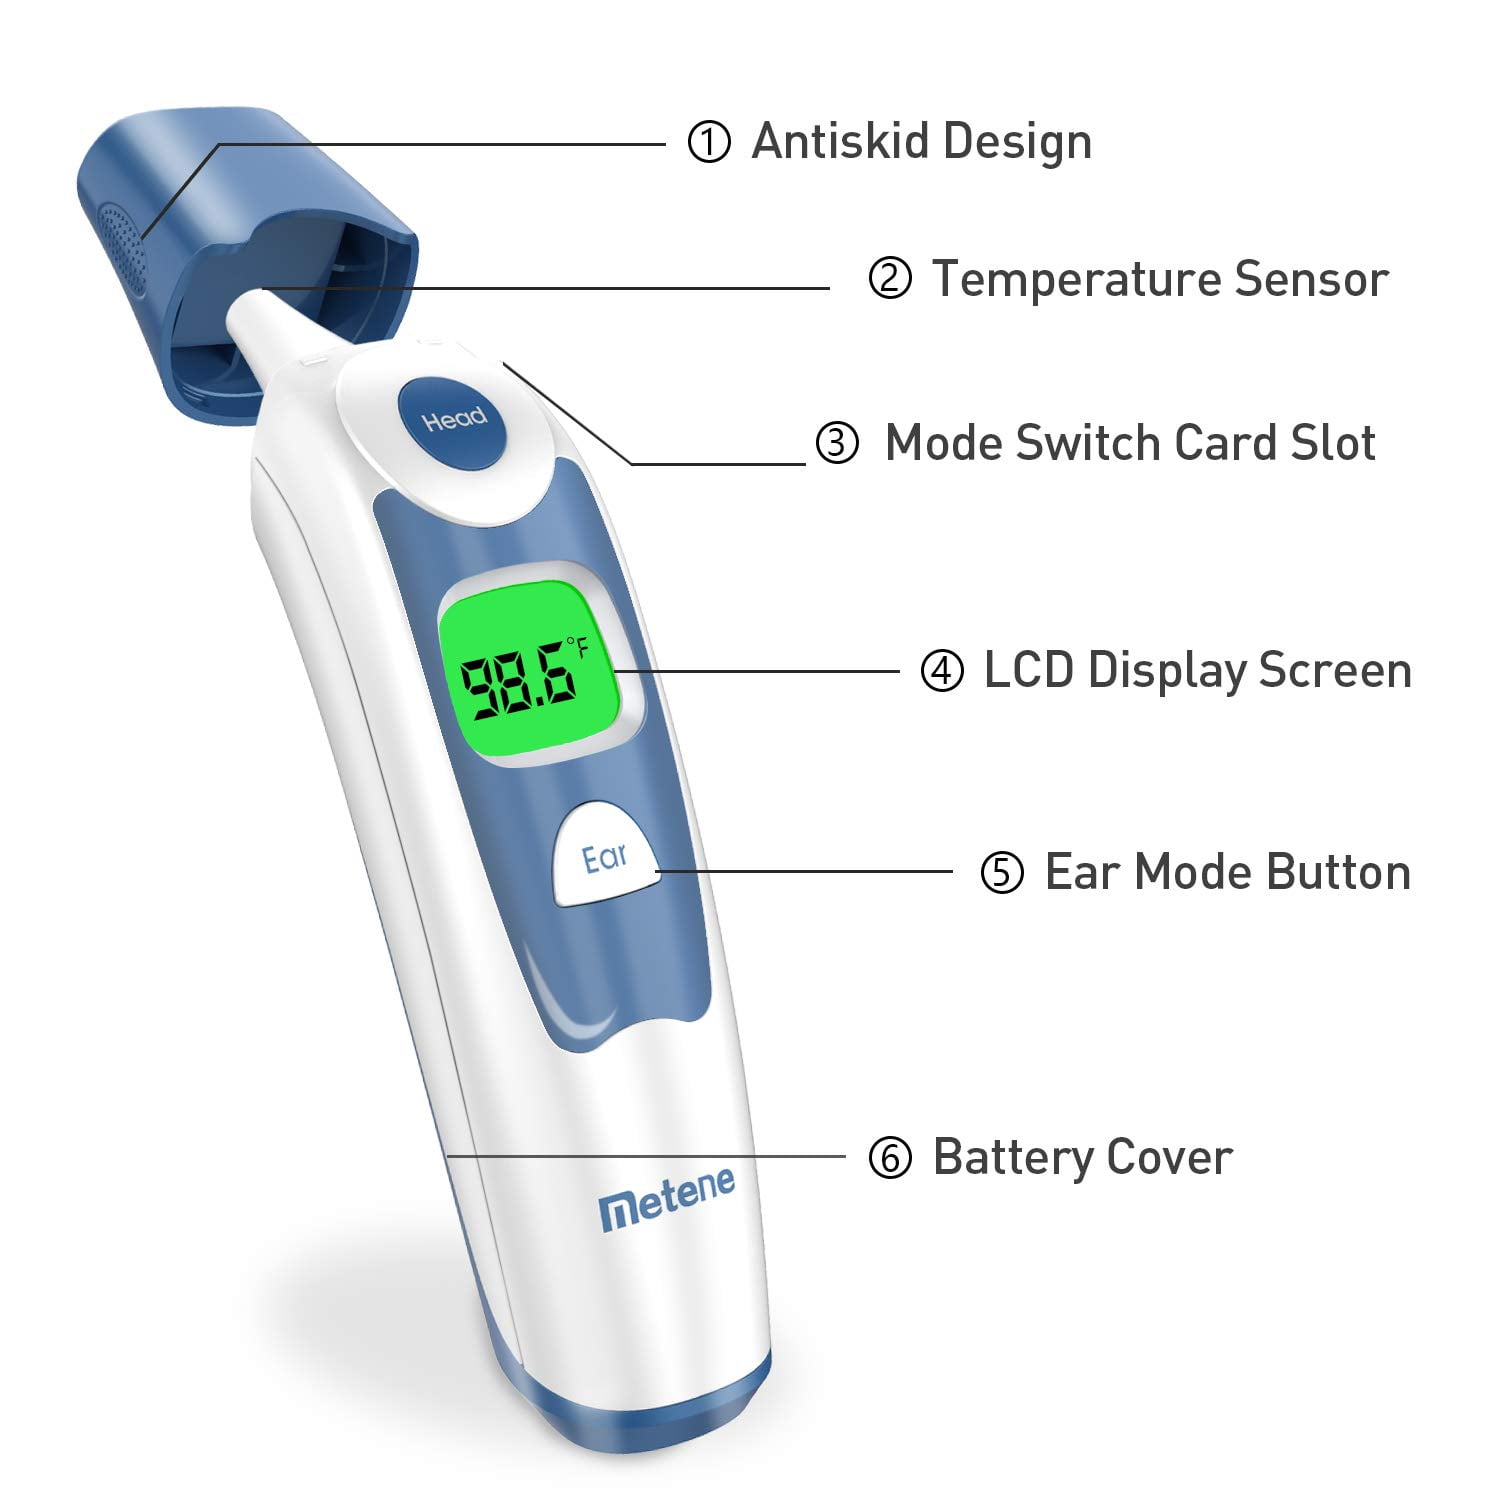 Medline Infrared Talking Ear / Forehead Thermometer 1Ct